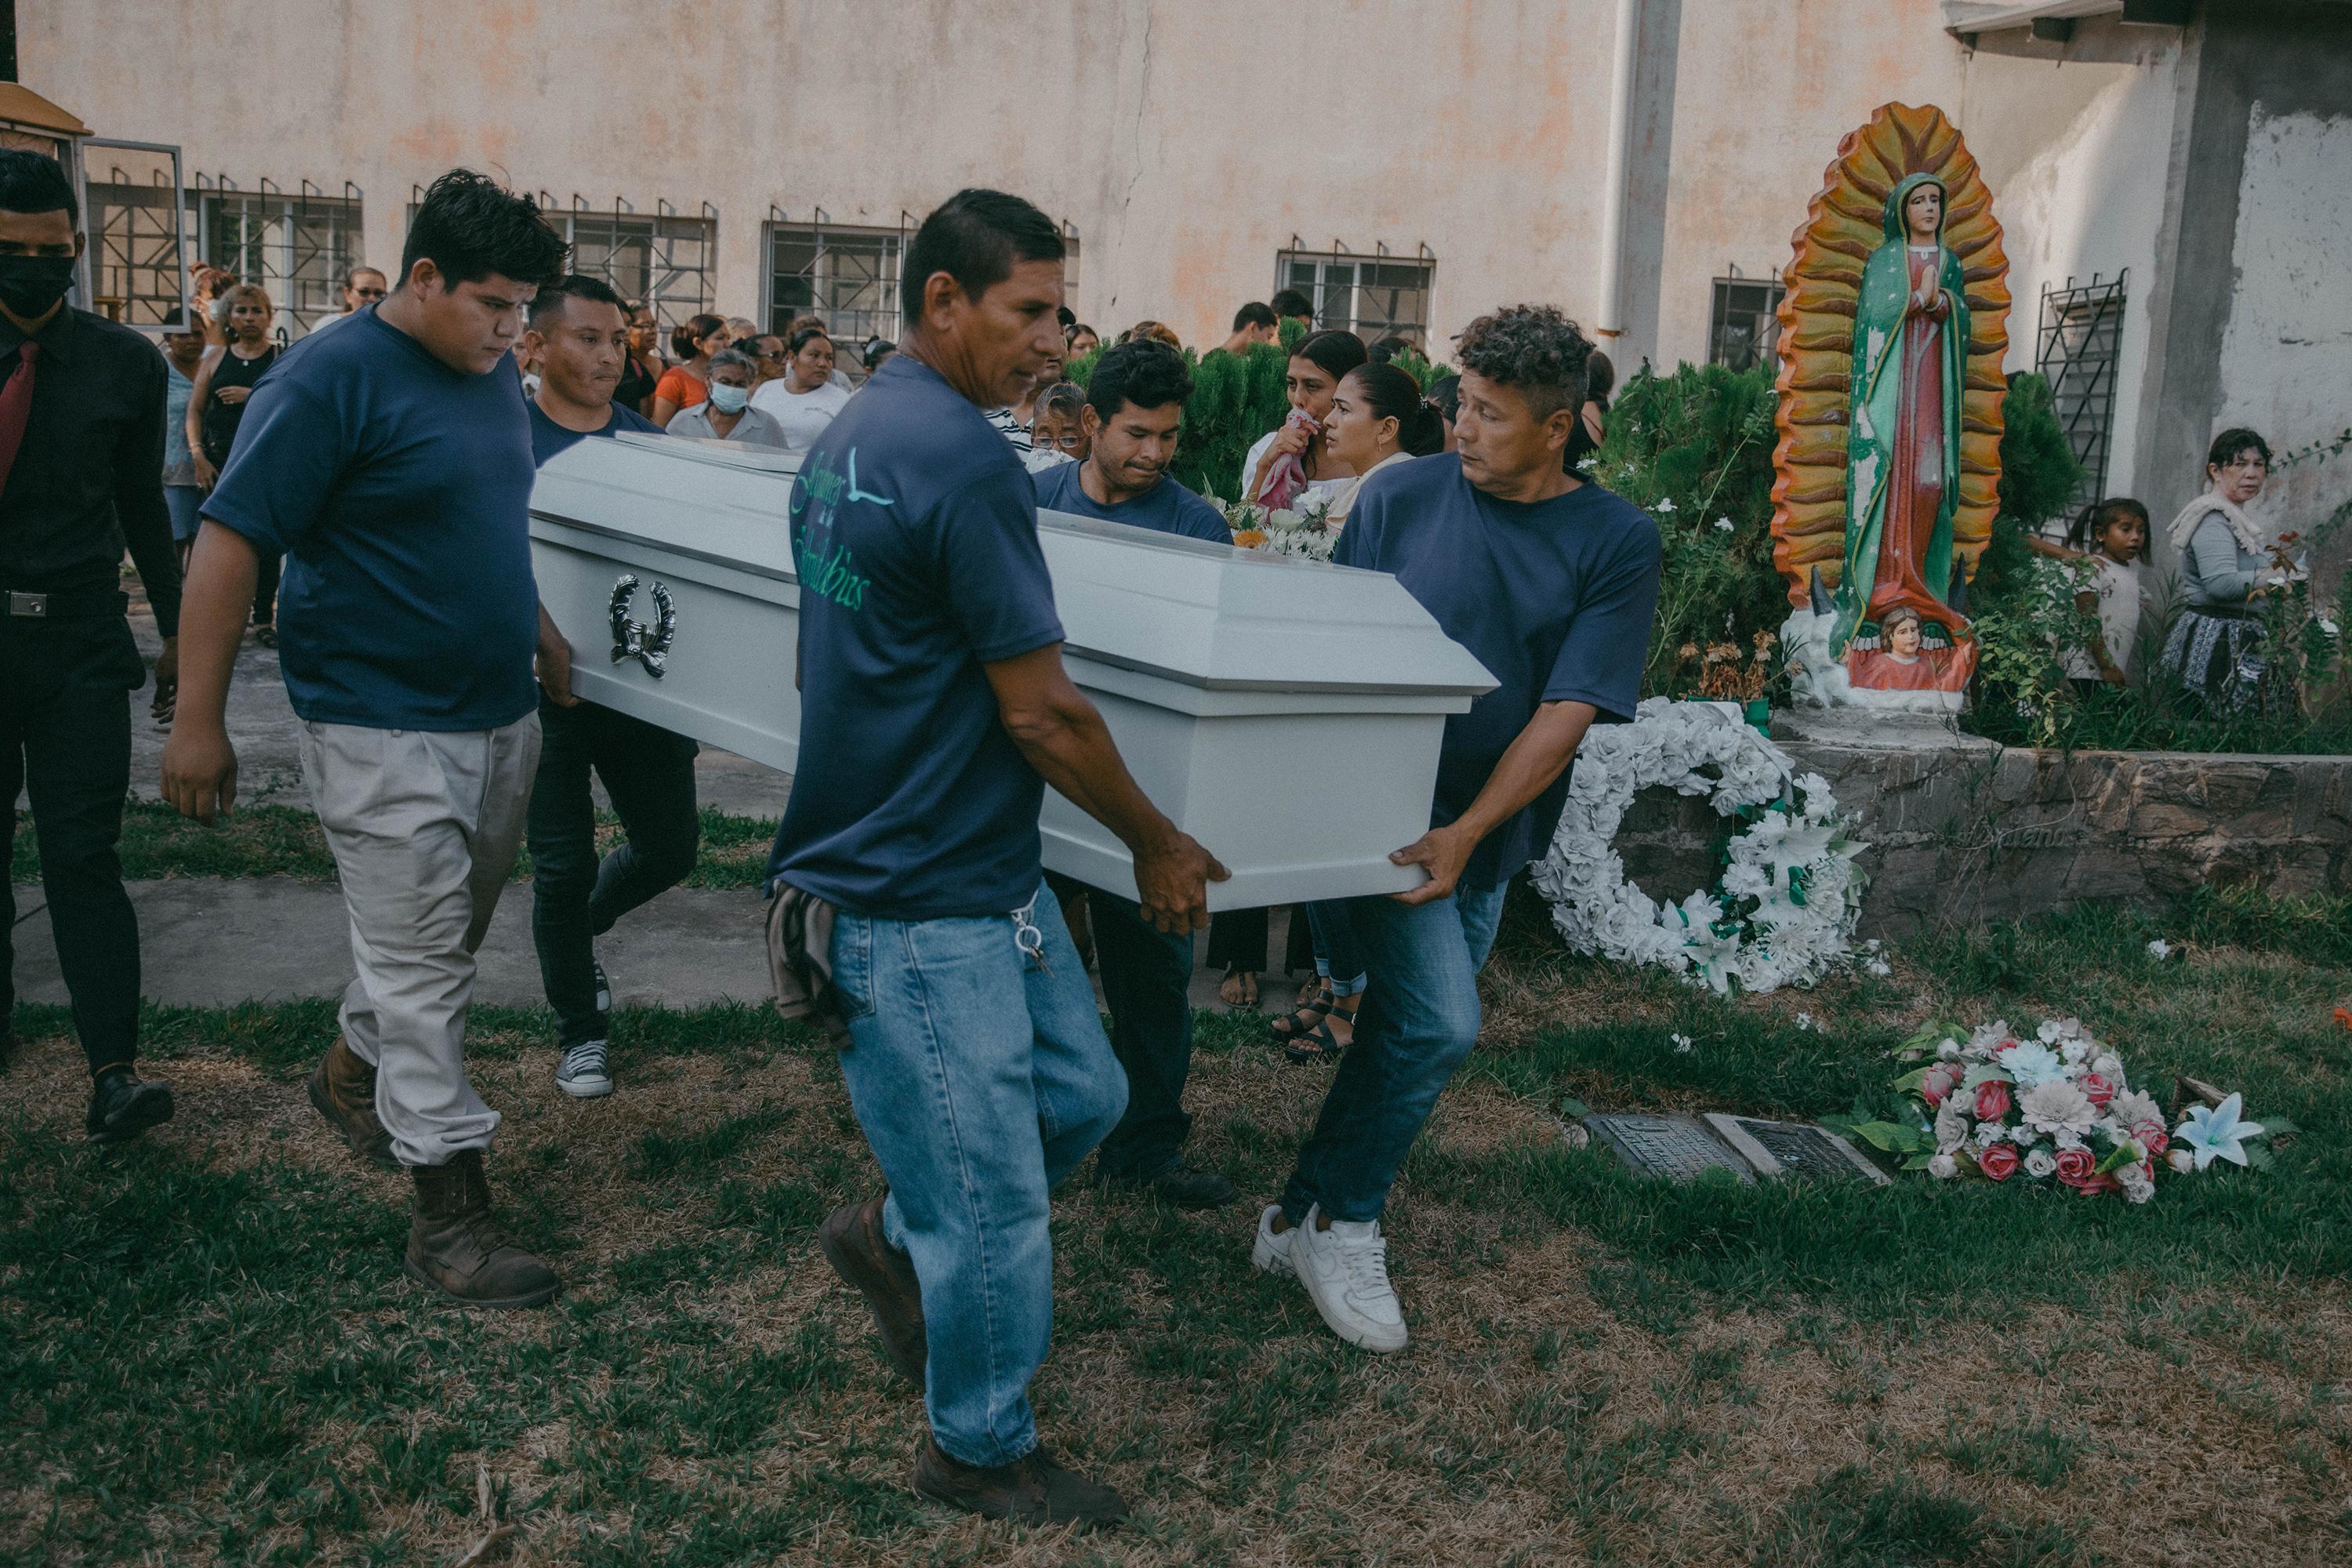 Funeral home employees carry a coffin with the remains of Rodrigo Vásquez, 44, who was detained on May 9, 2022 under El Salvador’s state of exception and died in Izalco prison. According to El Salvador’s medical examiner’s office, Vásquez died of pneumonia. Photo Carlos Barrera